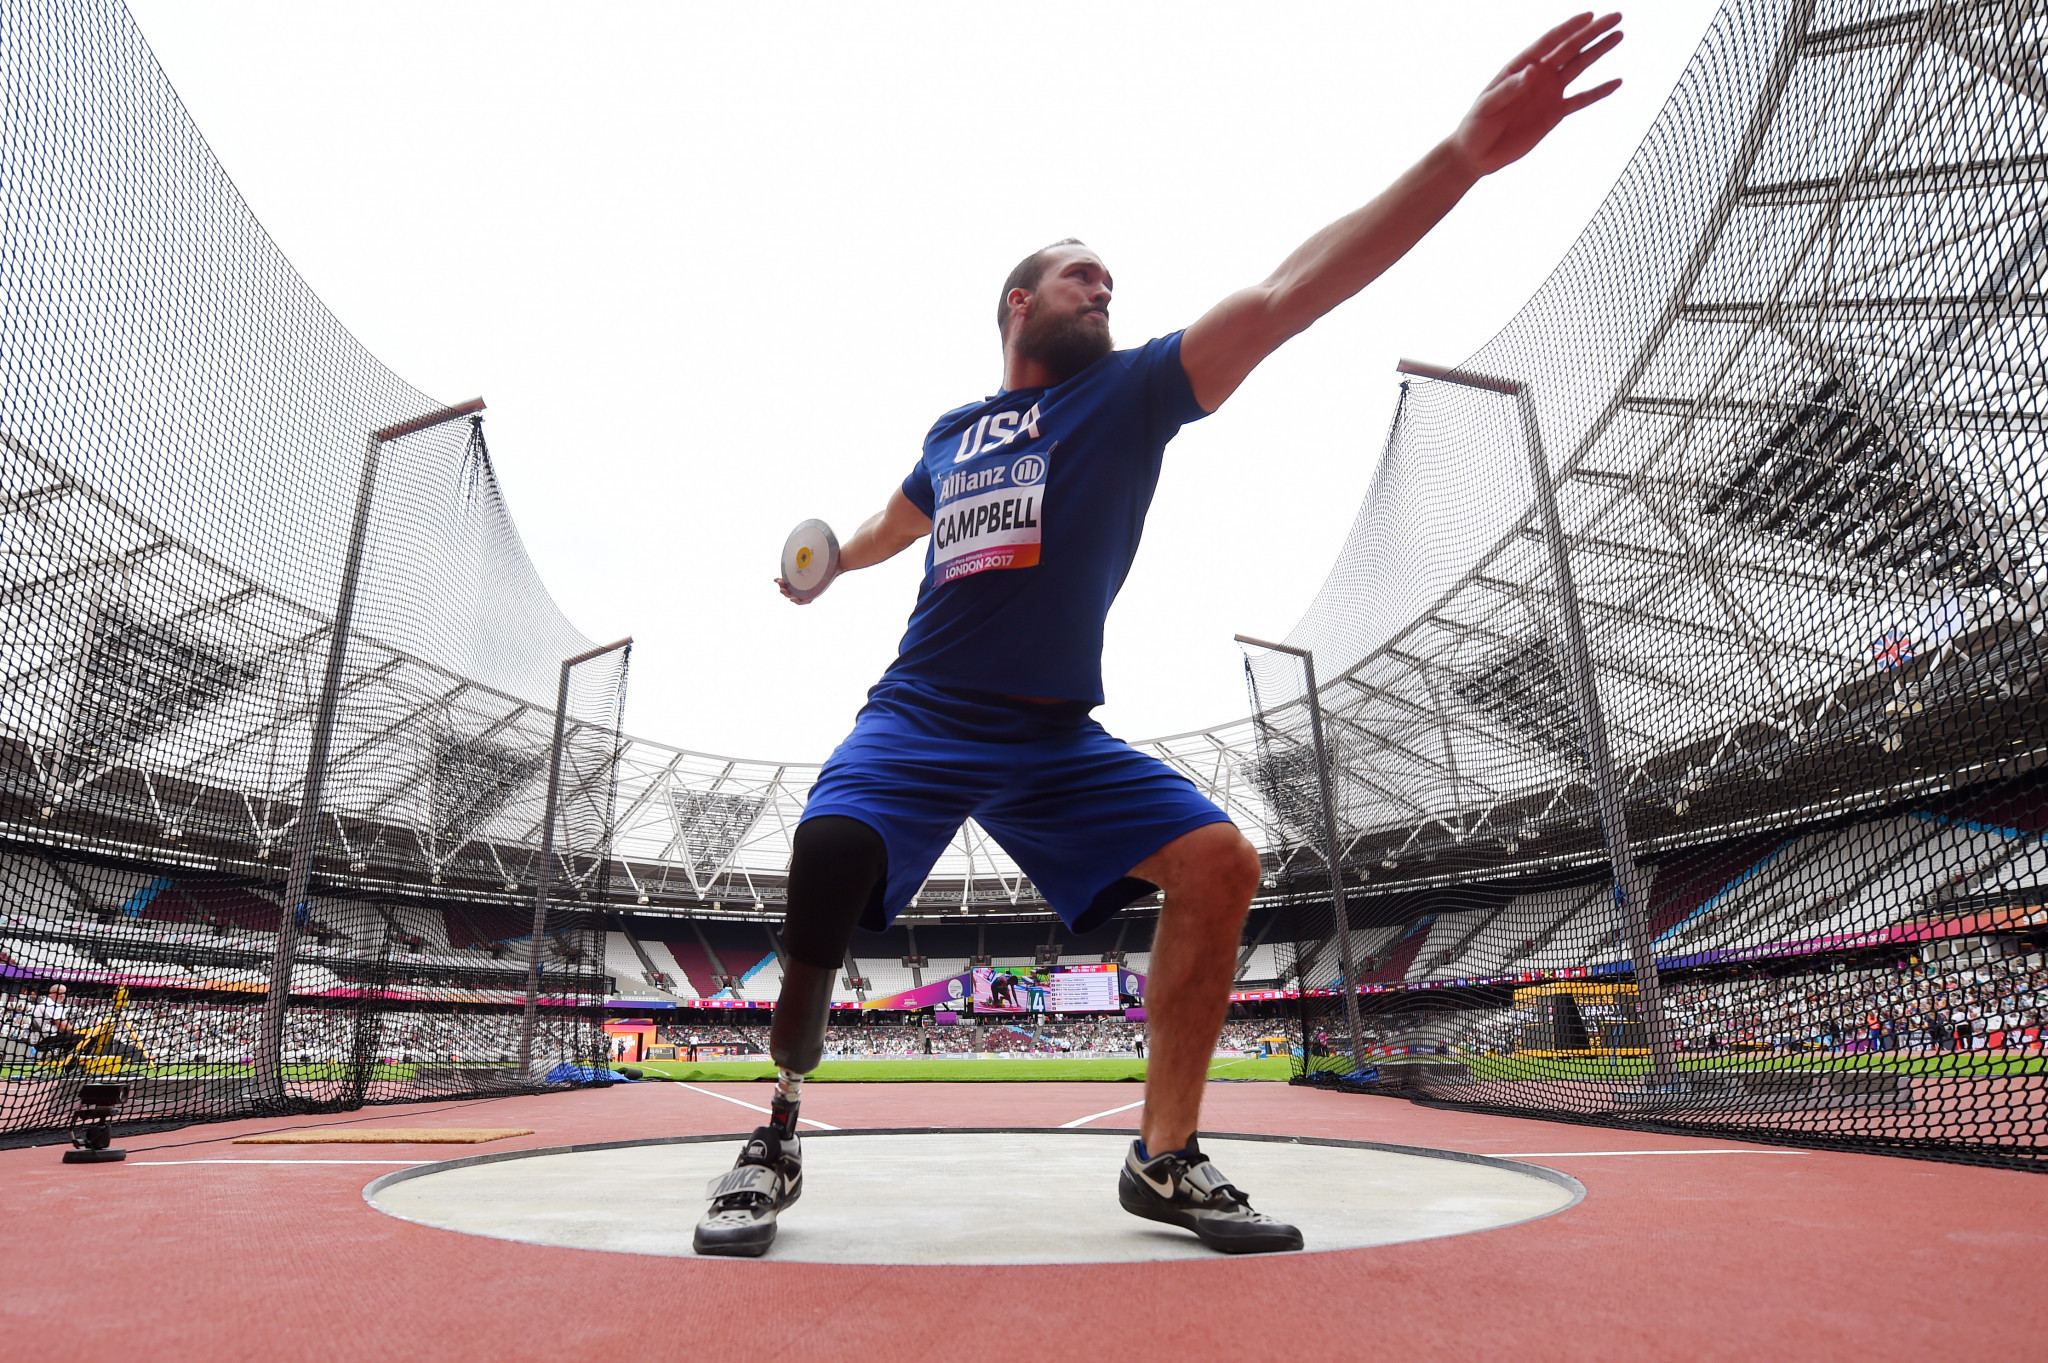 Jeremy Campbell, who has two Olympic gold medals in discus F44 and one in pentathlon P44, will compete at the Lima 2019 Parapan American Games ©Getty Images